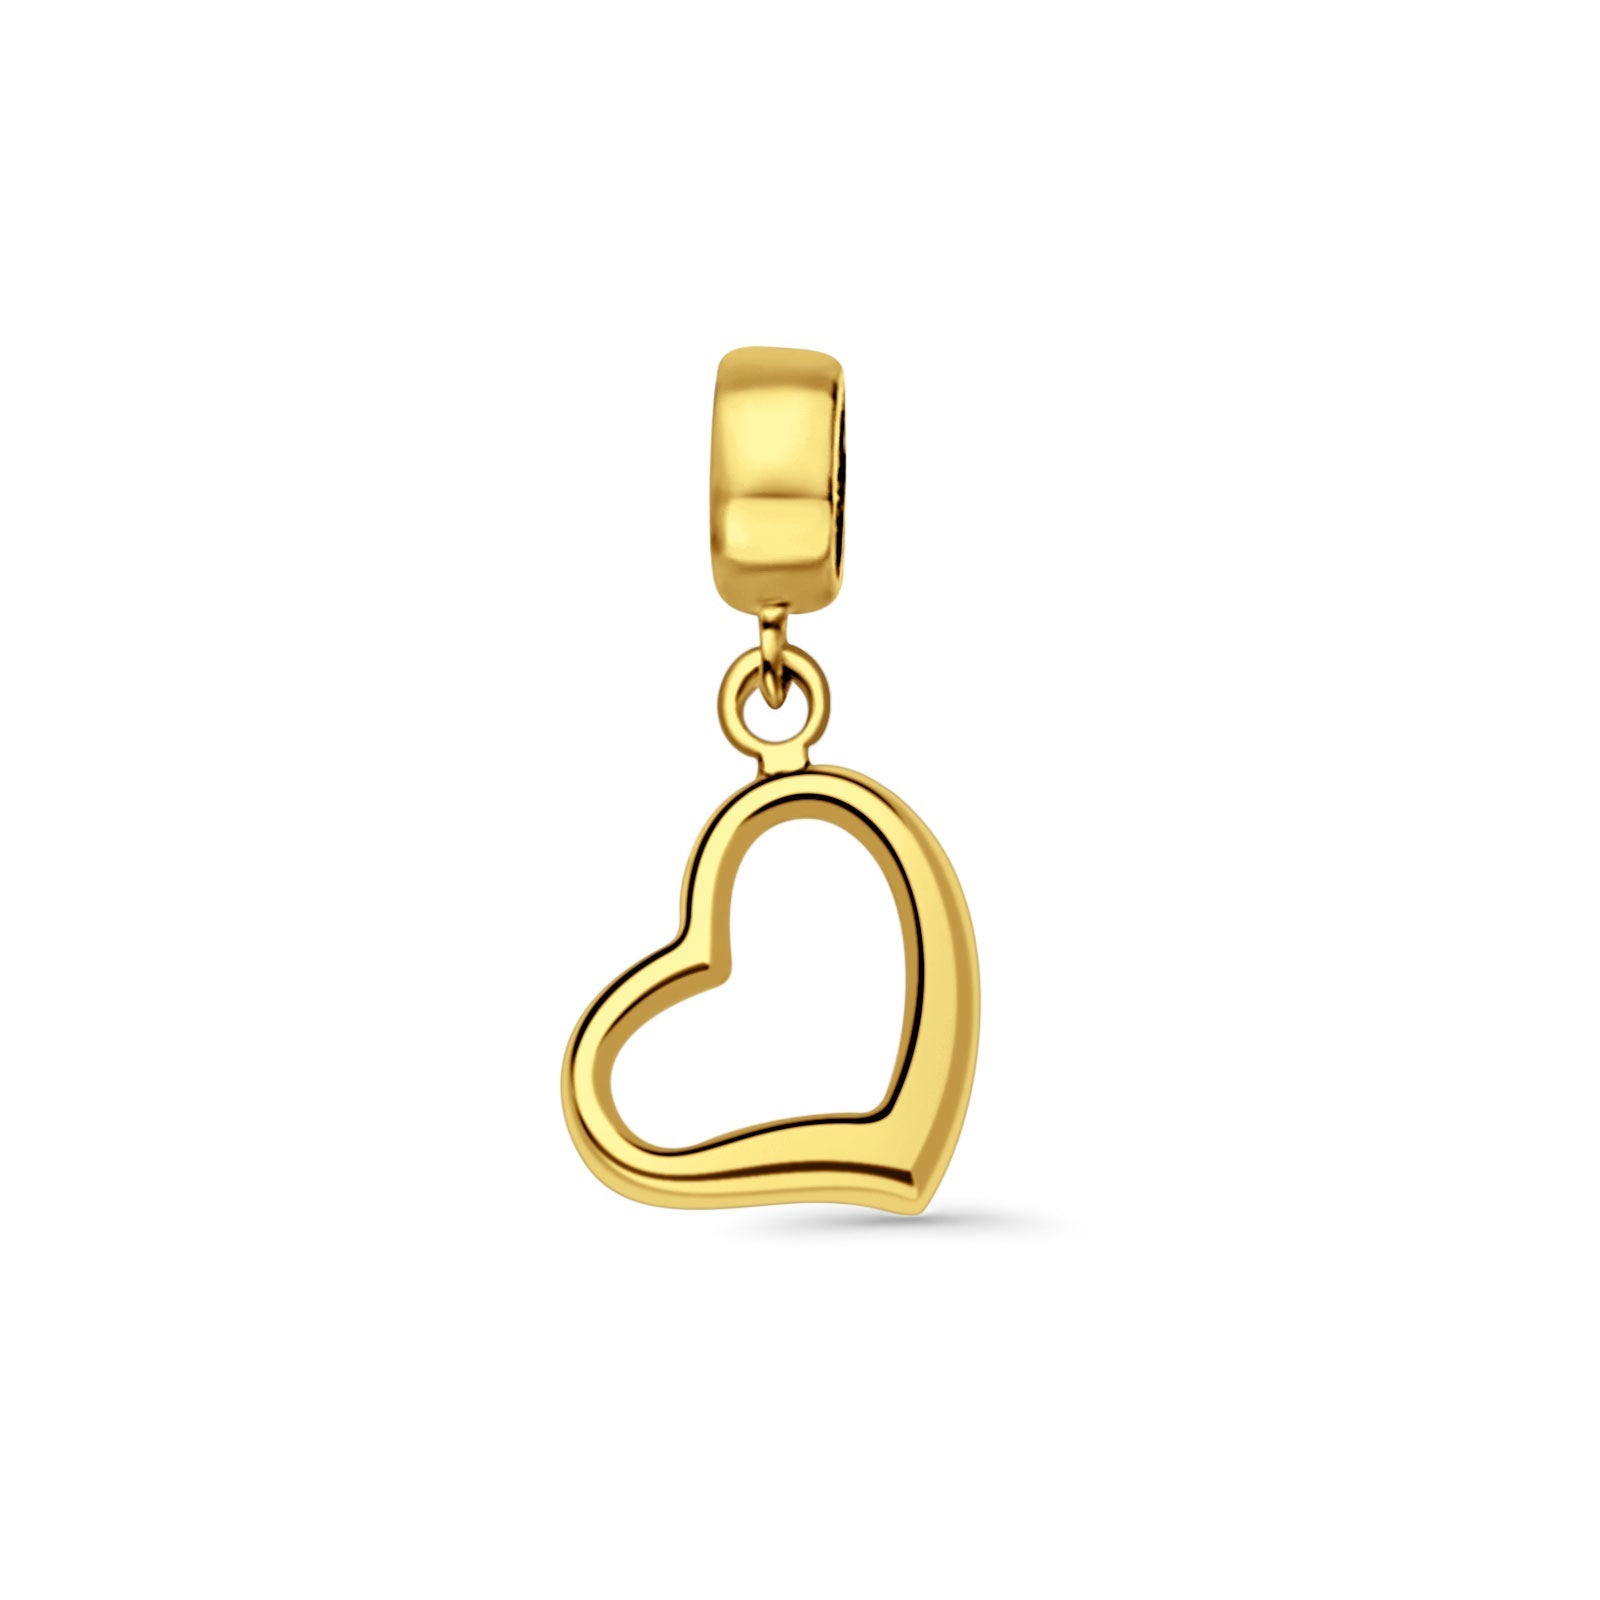 14K Yellow Gold Heart Charm for Mix&Match Pendant 21mmX10mm With 16 Inch To 24 Inch 0.8MM Width Square Wheat Chain Necklace